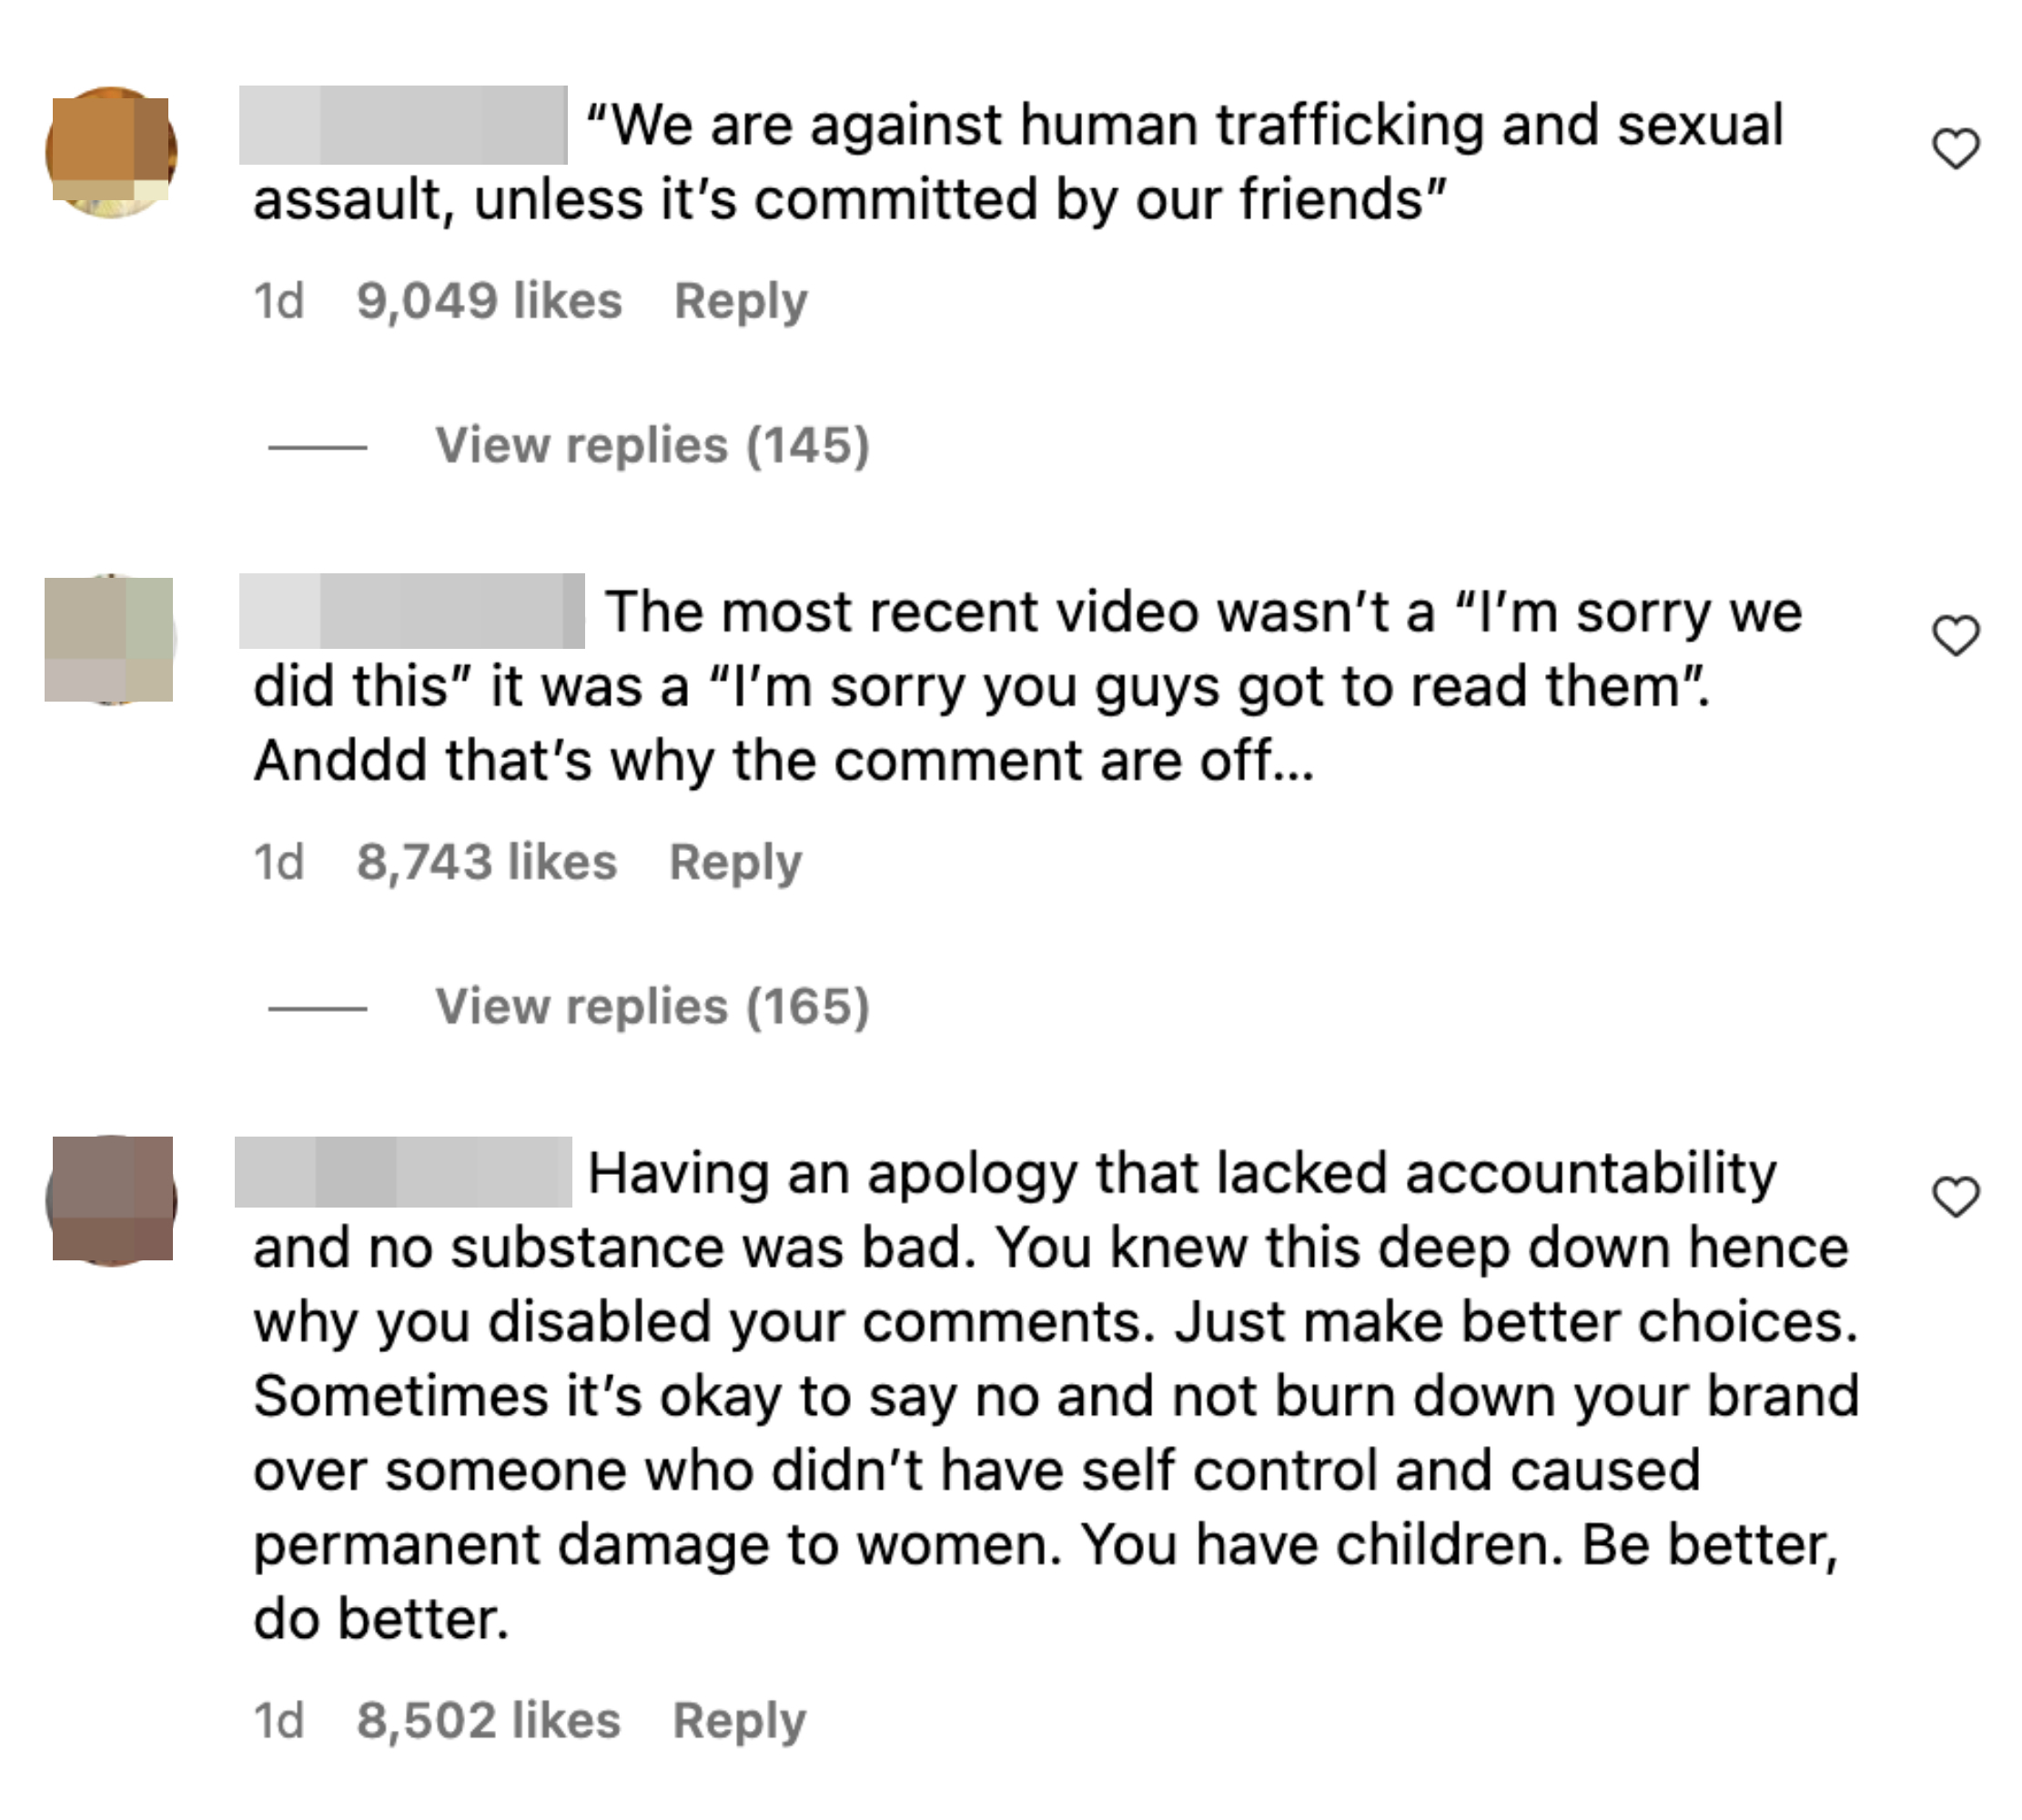 Screenshot of comments, including &quot;Having an apology that lacked accountability and no substance was bad&quot; and &quot;The most recent video wasn&#x27;t a &#x27;I&#x27;m sorry we did this&#x27; it was a &#x27;I&#x27;m sorry you guys got to read them&quot;